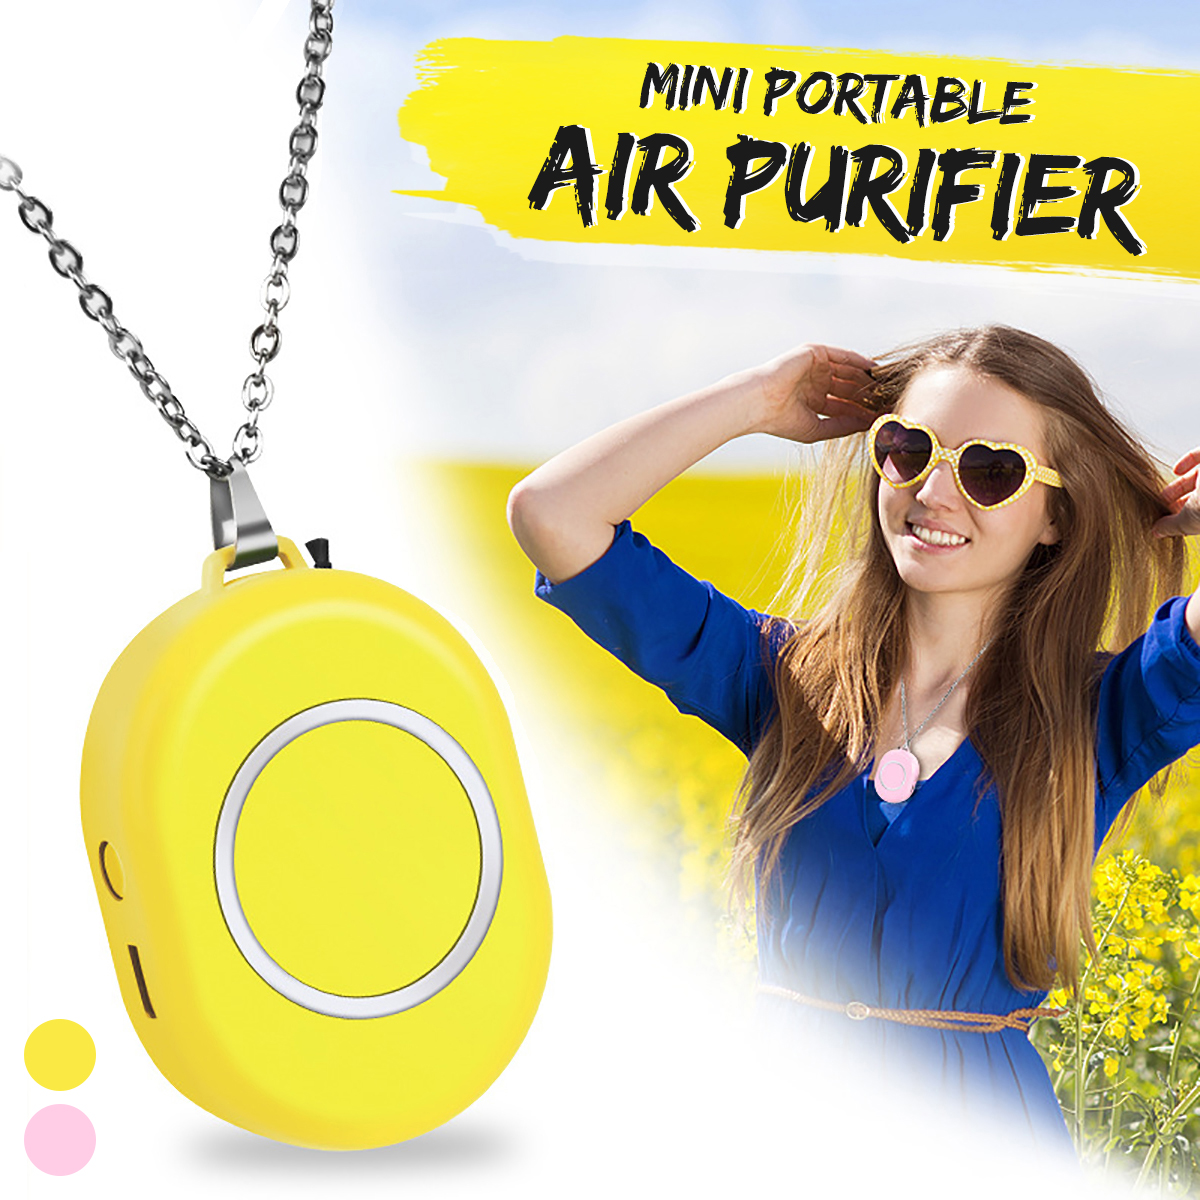 Mini-Portable-Air-Purifier-Negative-Ions-Neck-Hanging-Necklace-Personal-Air-Cleaner-1707470-1